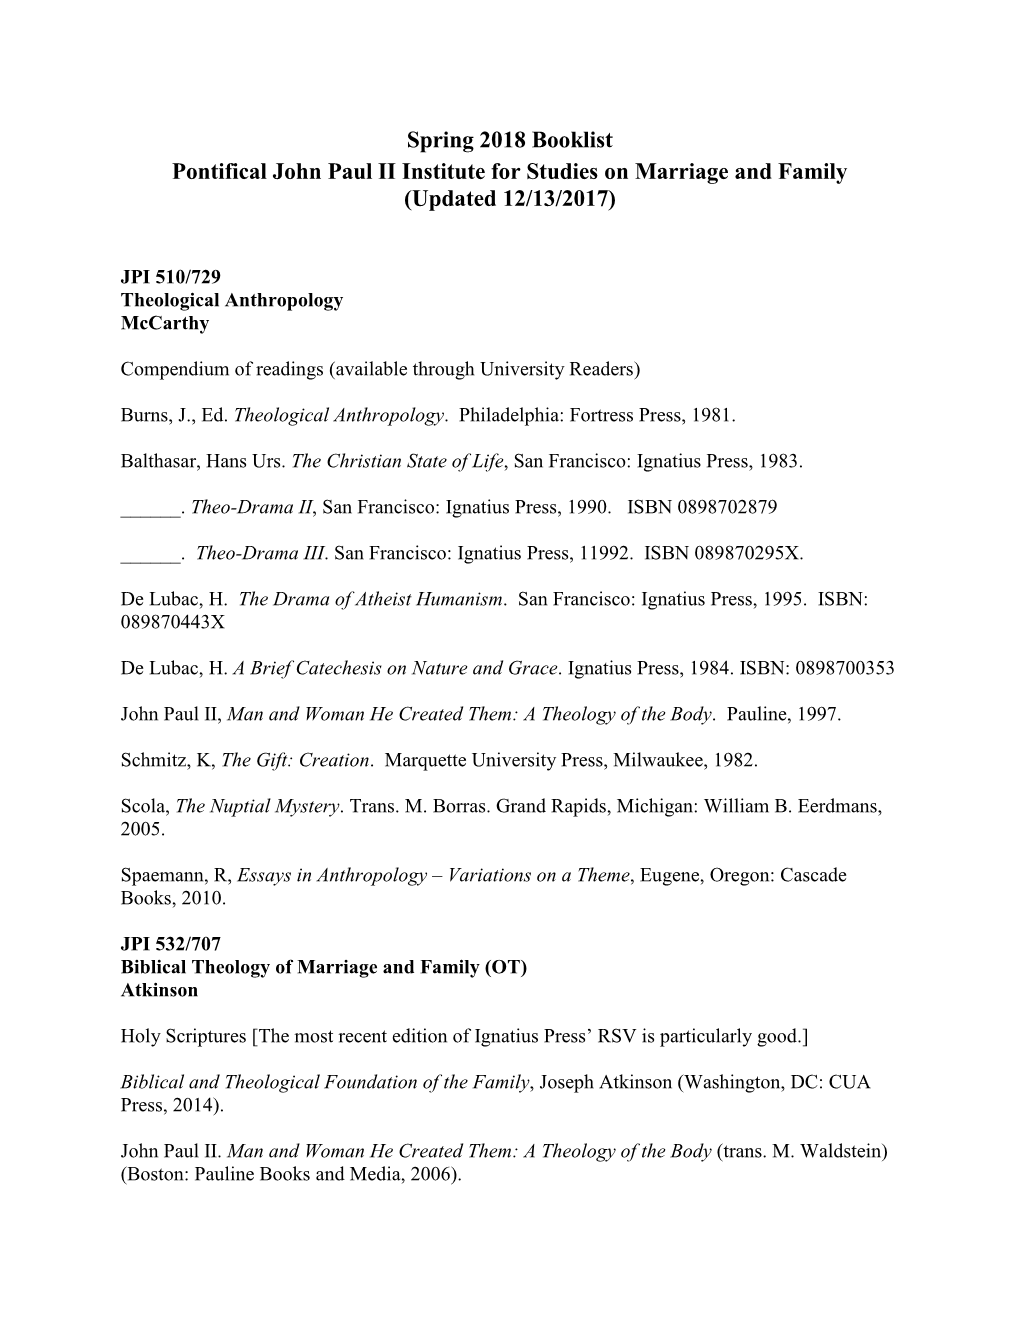 Spring 2018 Booklist Pontifical John Paul II Institute for Studies on Marriage and Family (Updated 12/13/2017)